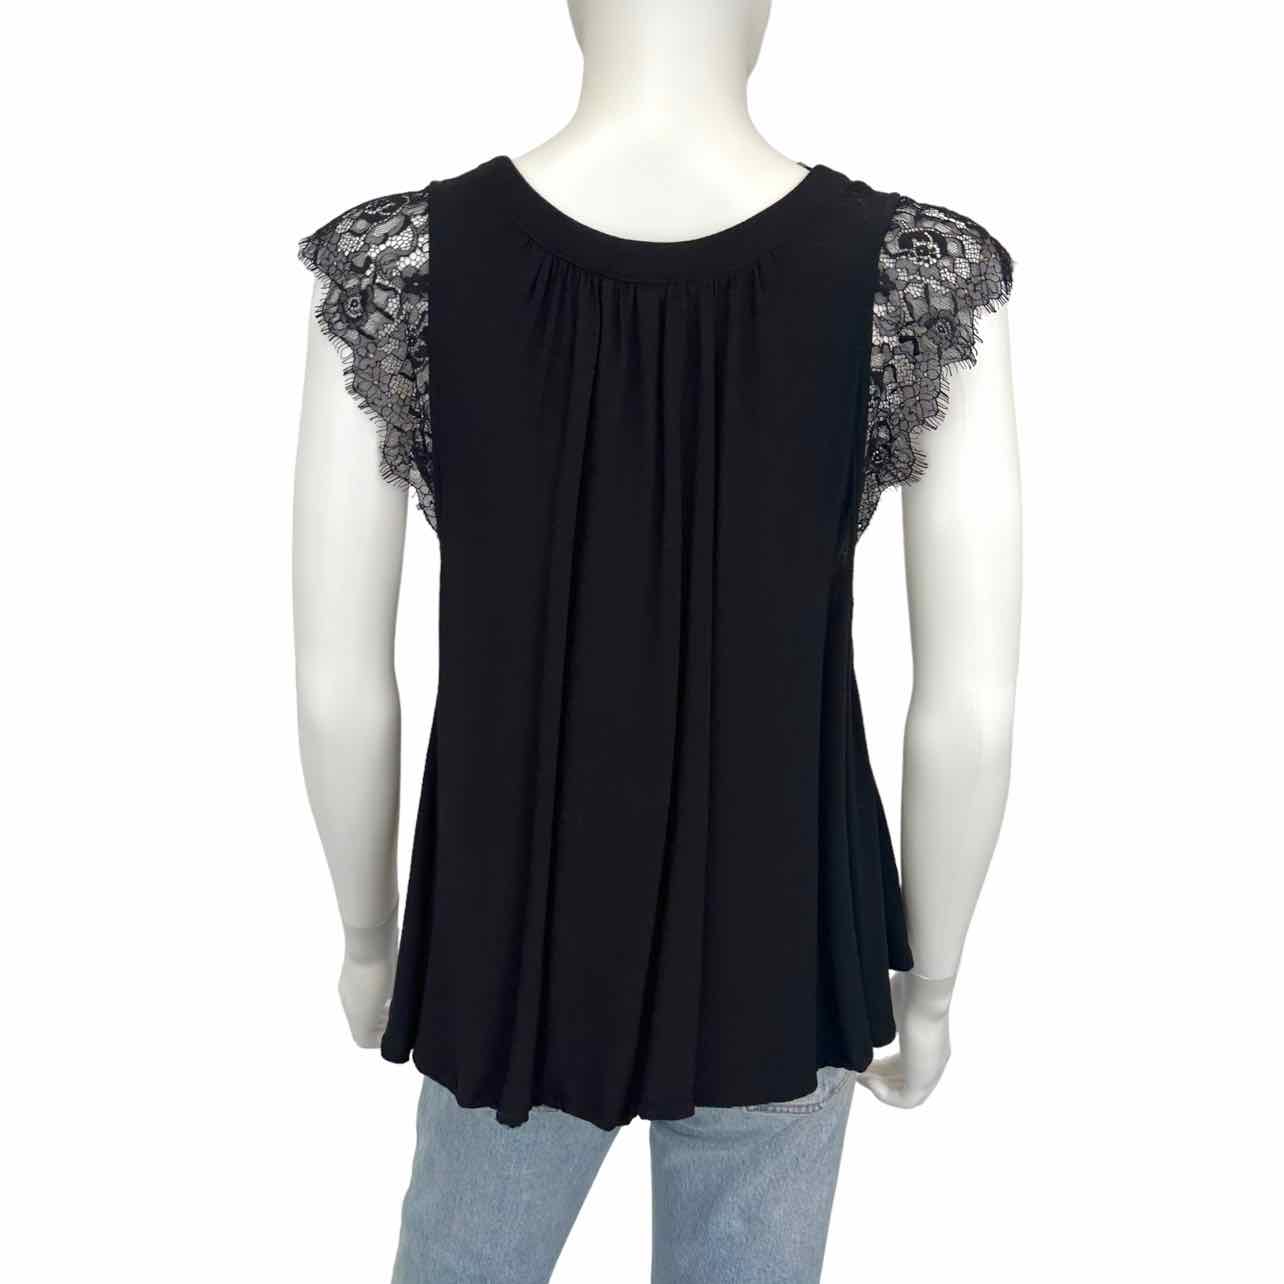 Free People Black Lace Lined Blouse Size XS